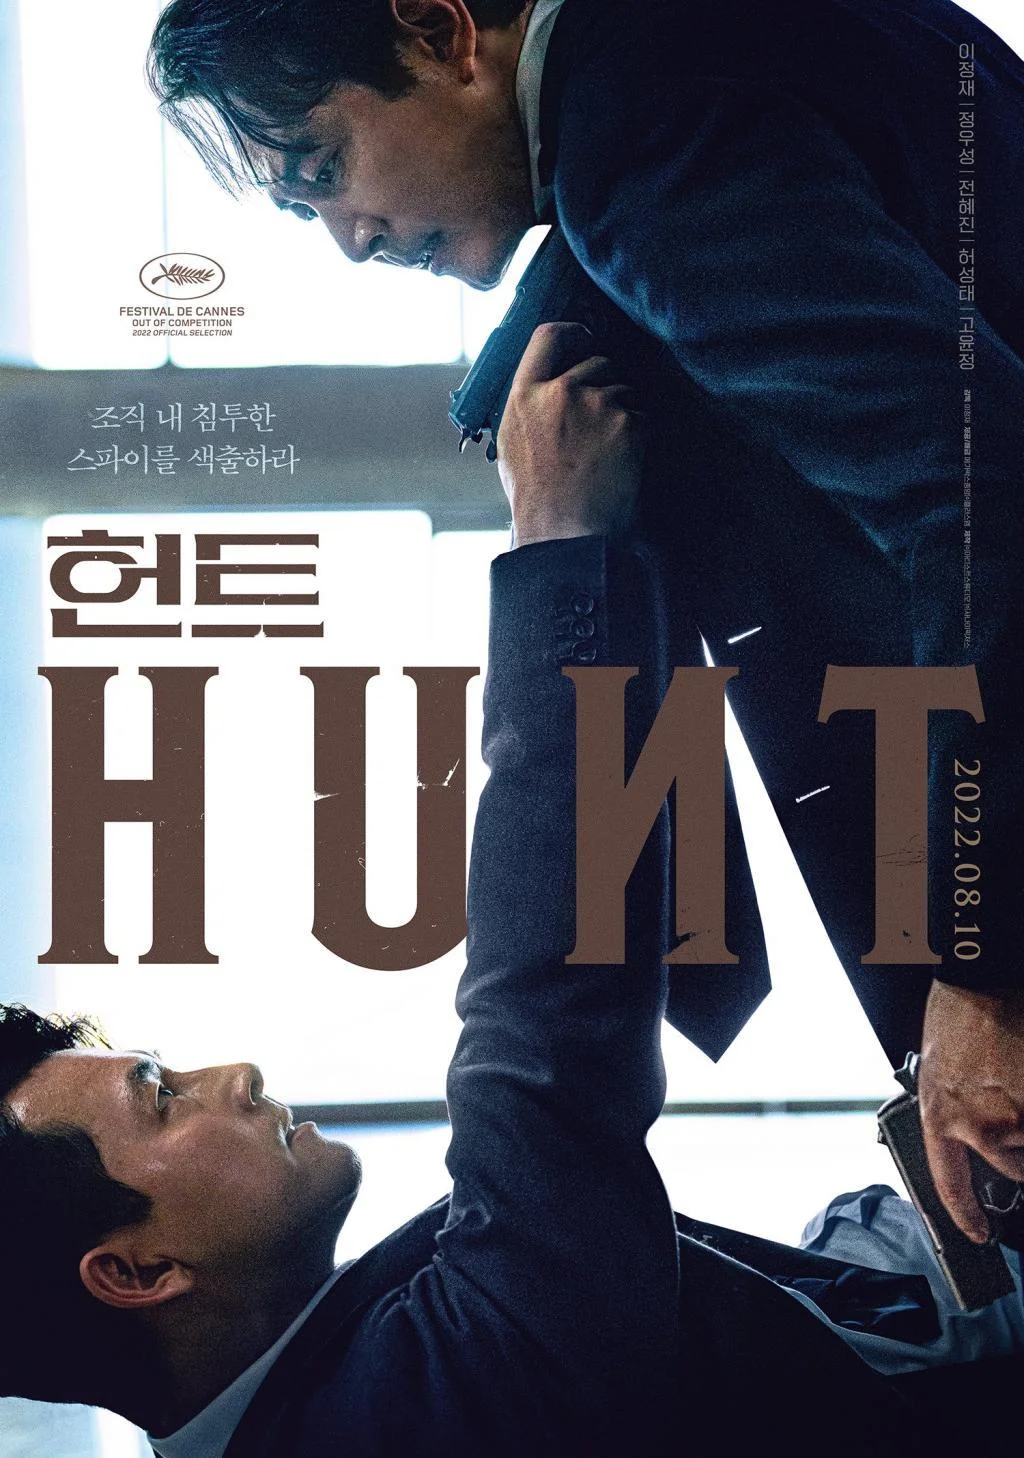 New trailer for spy film "Hunt" directed and starring Jung-jae Lee!